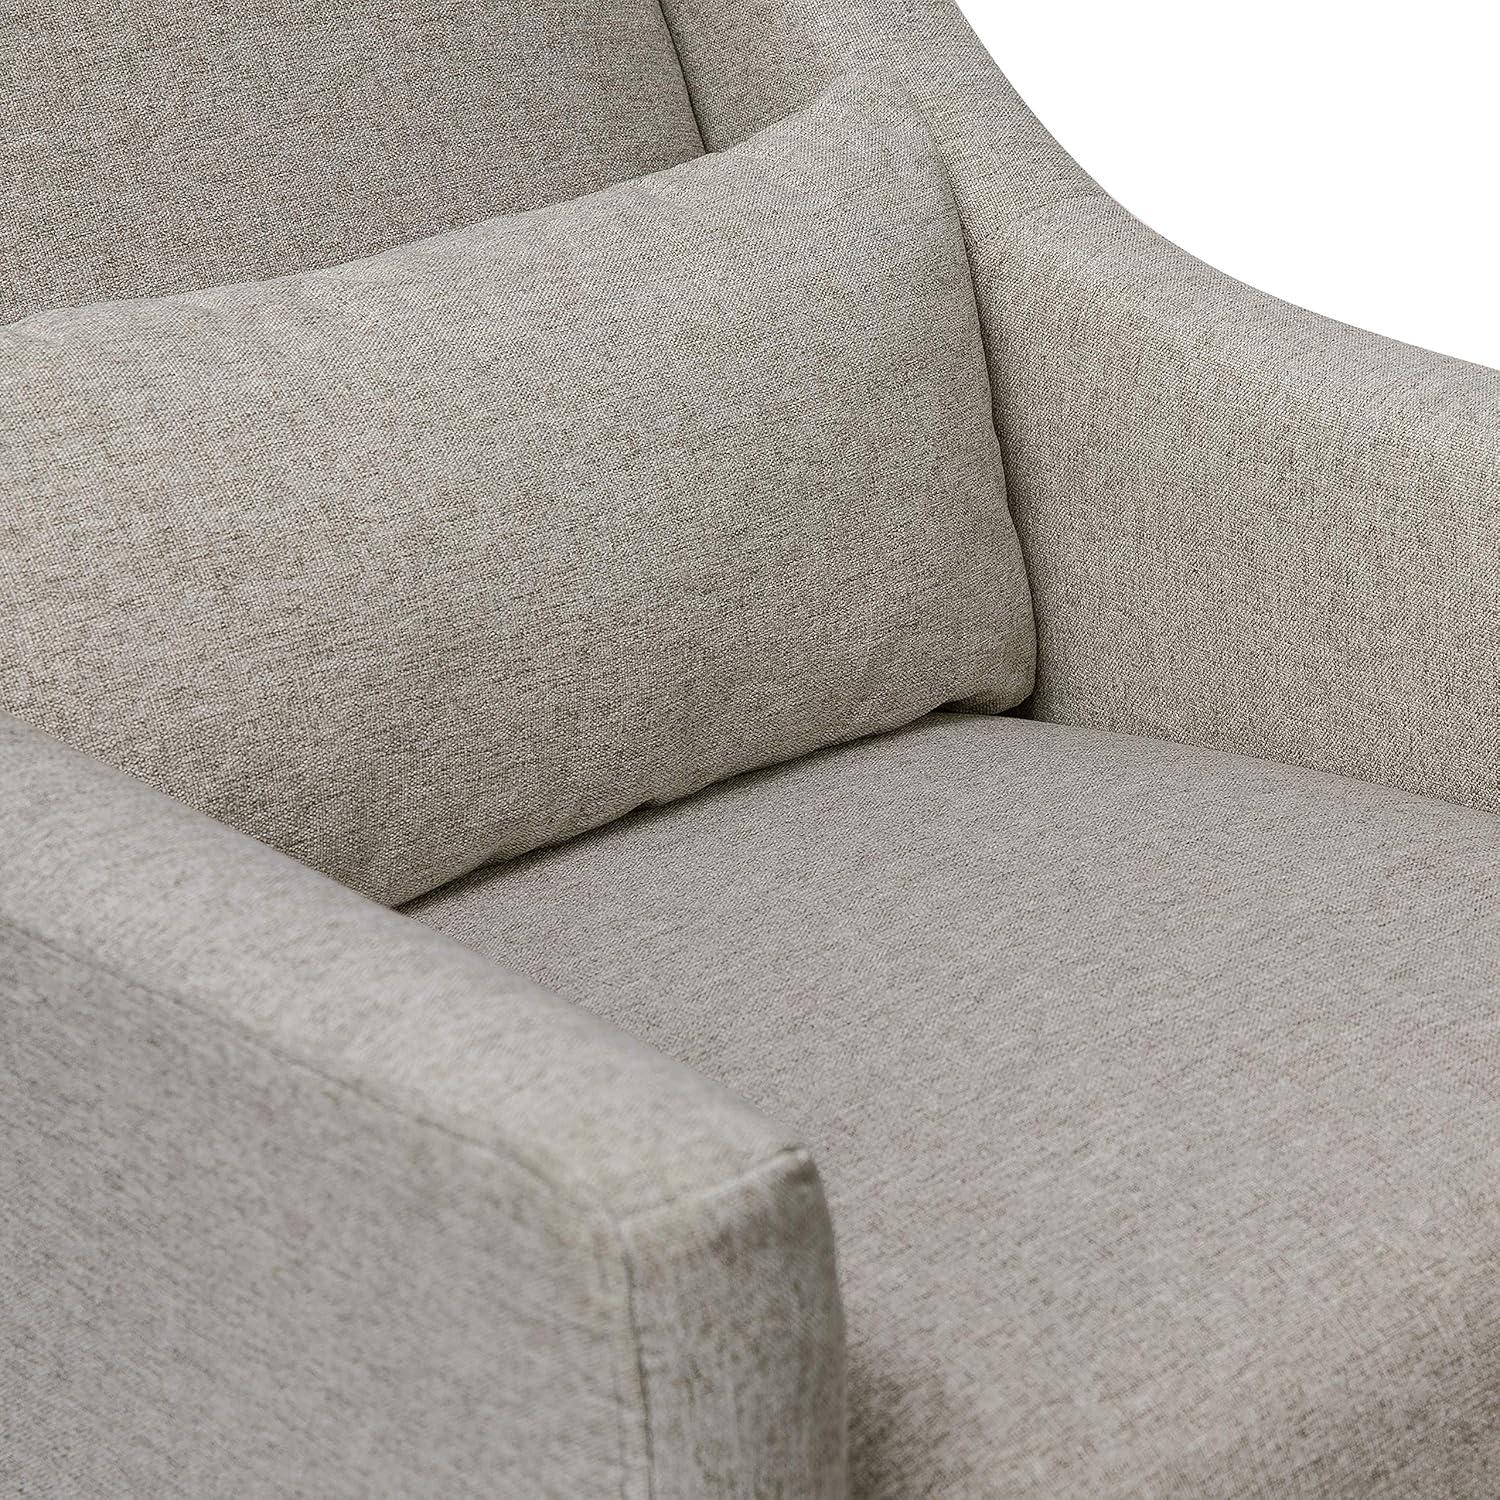 Eco-Weave Grey Swivel Glider with Ottoman for Modern Nurseries